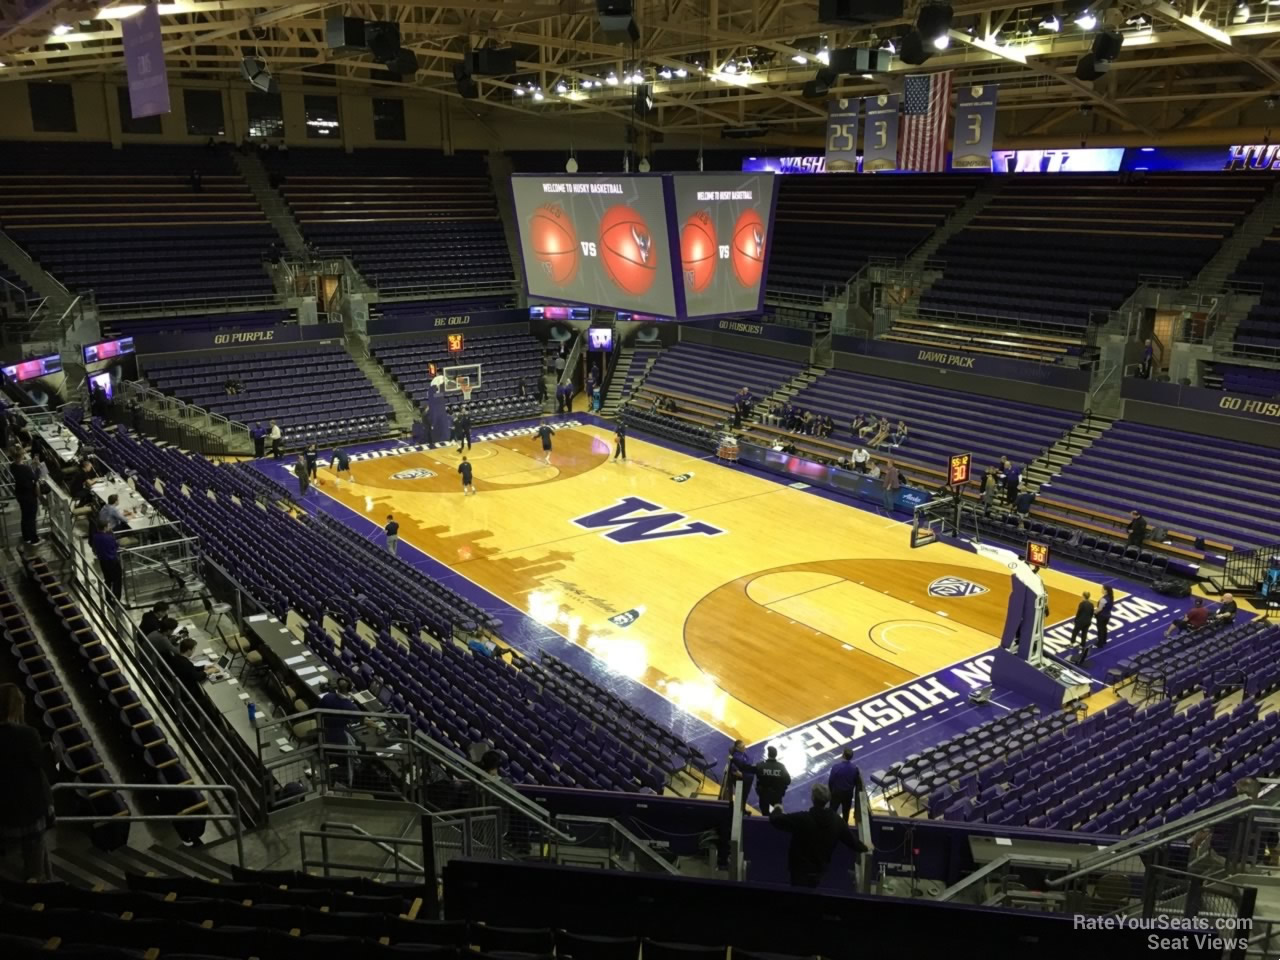 Section 6 at Alaska Airlines Arena - RateYourSeats.com